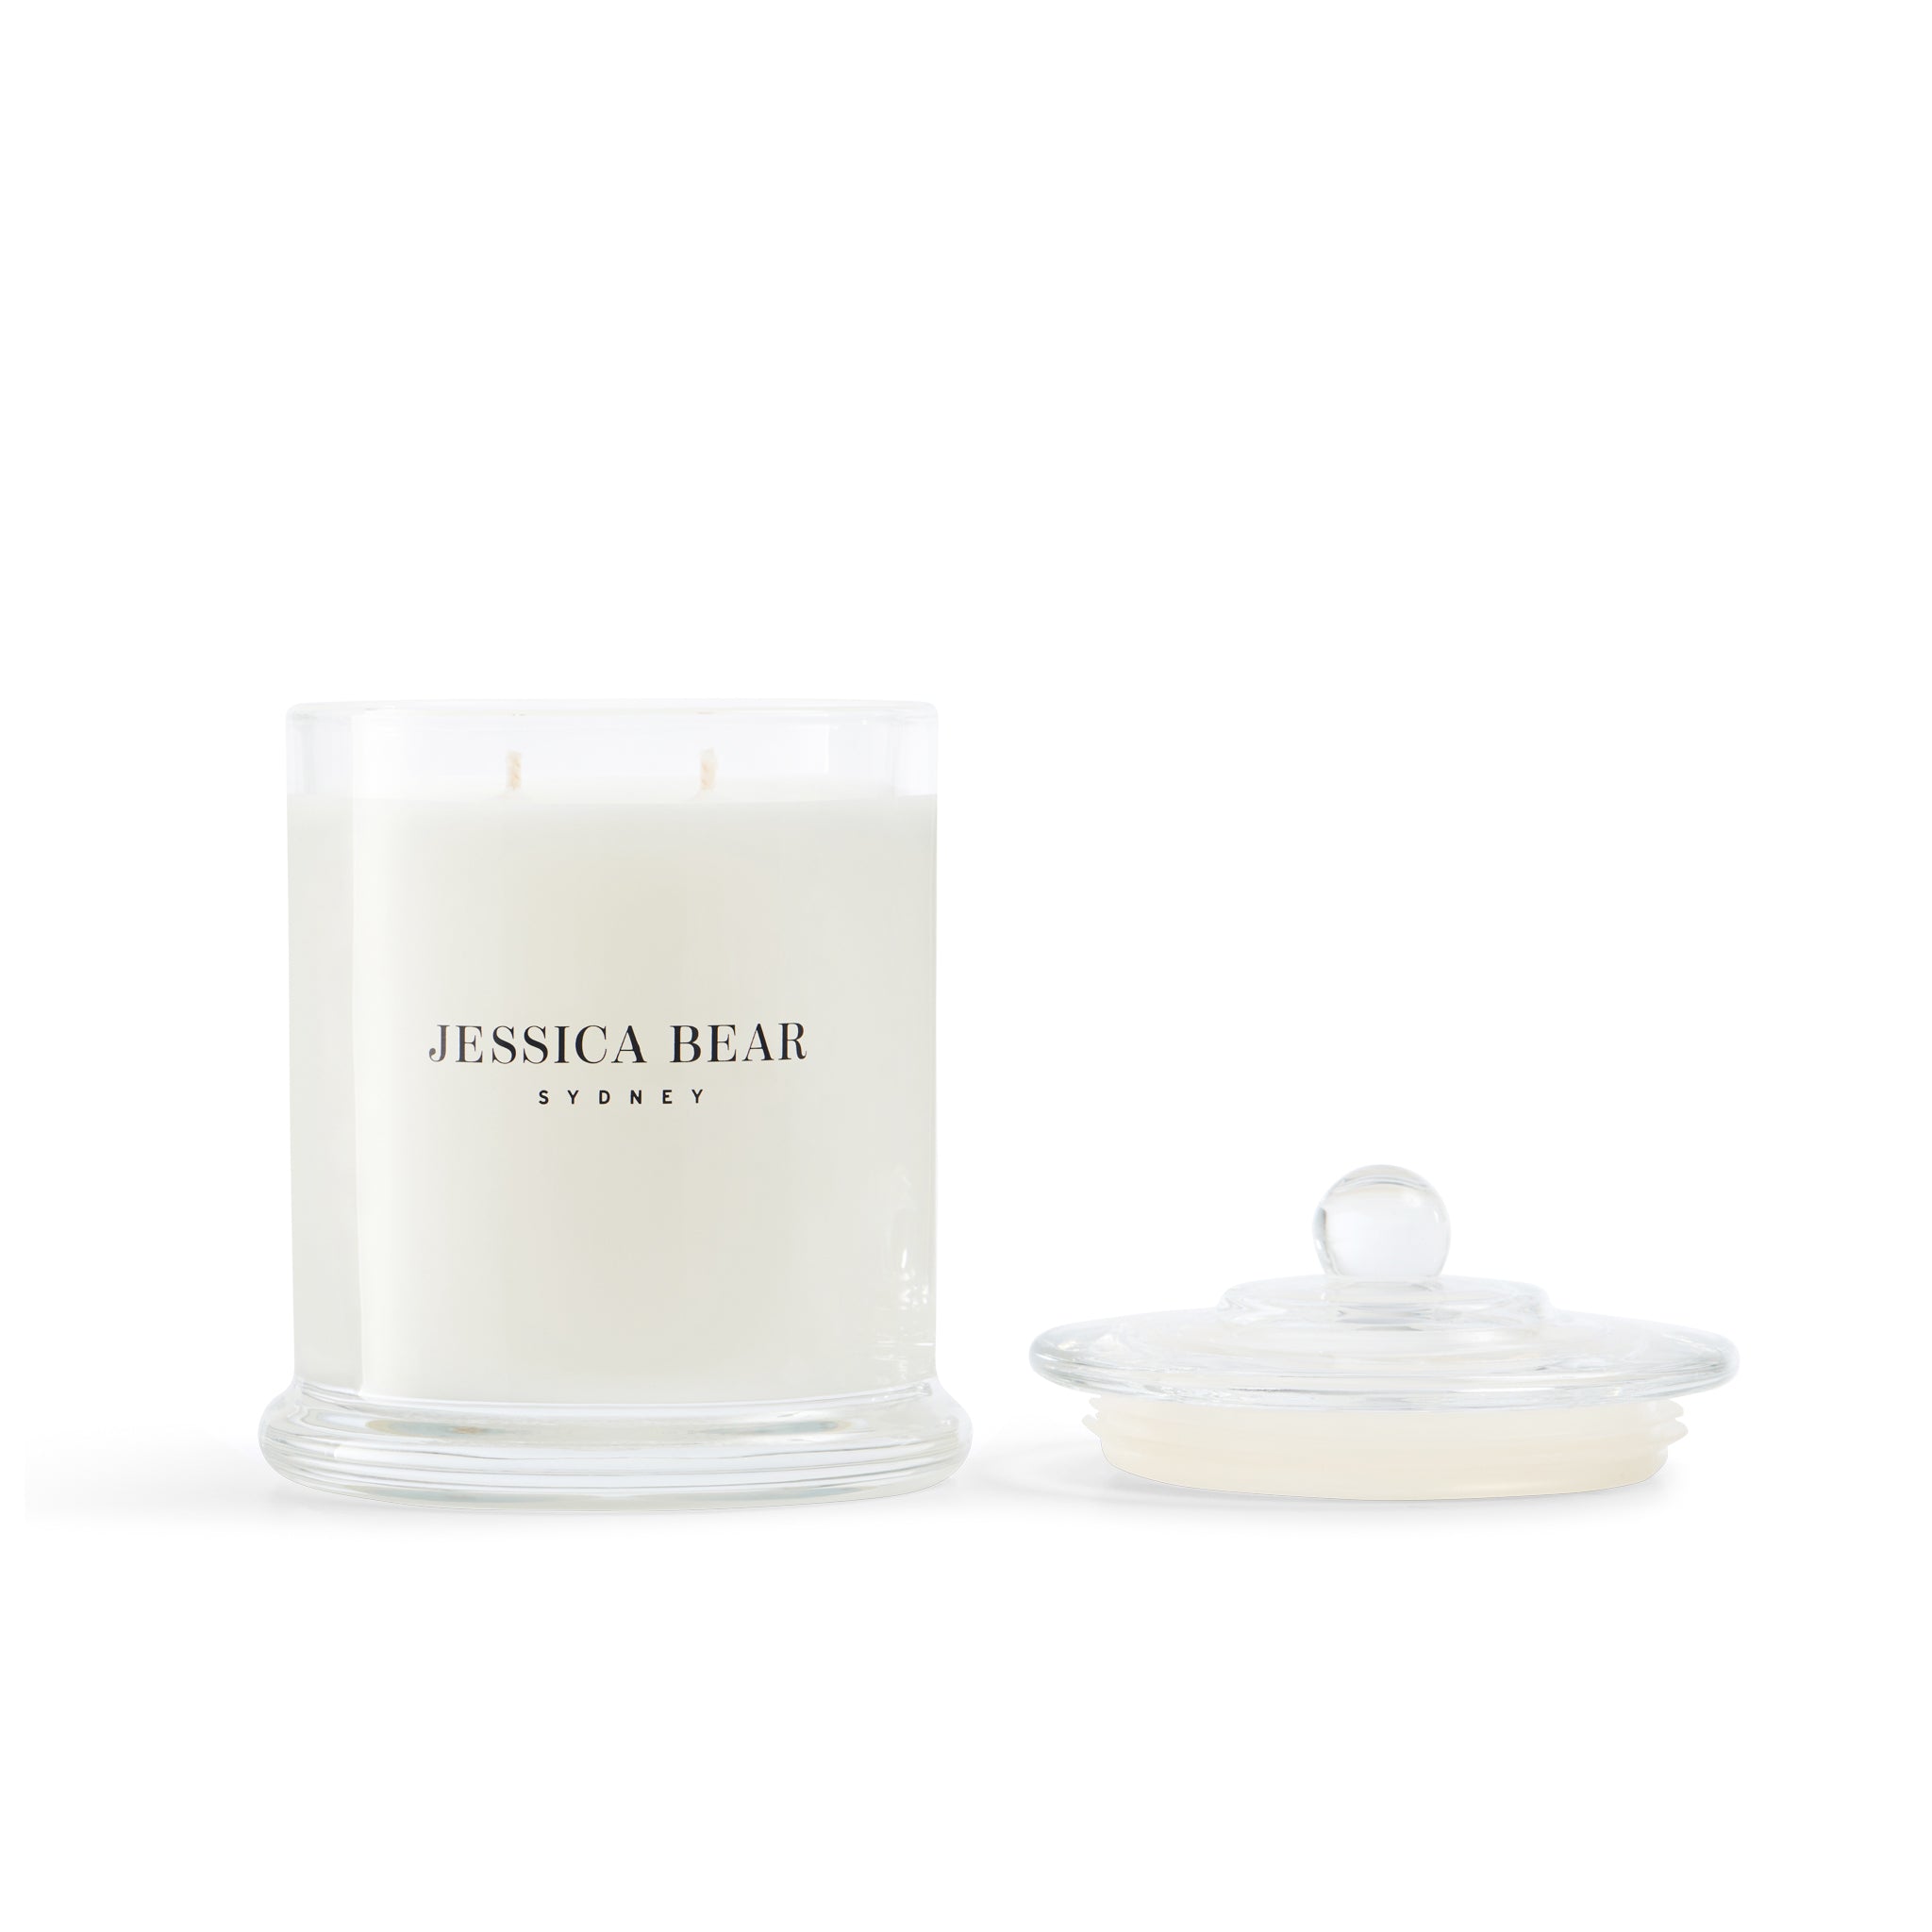 Nakia - 380g Scented Candle